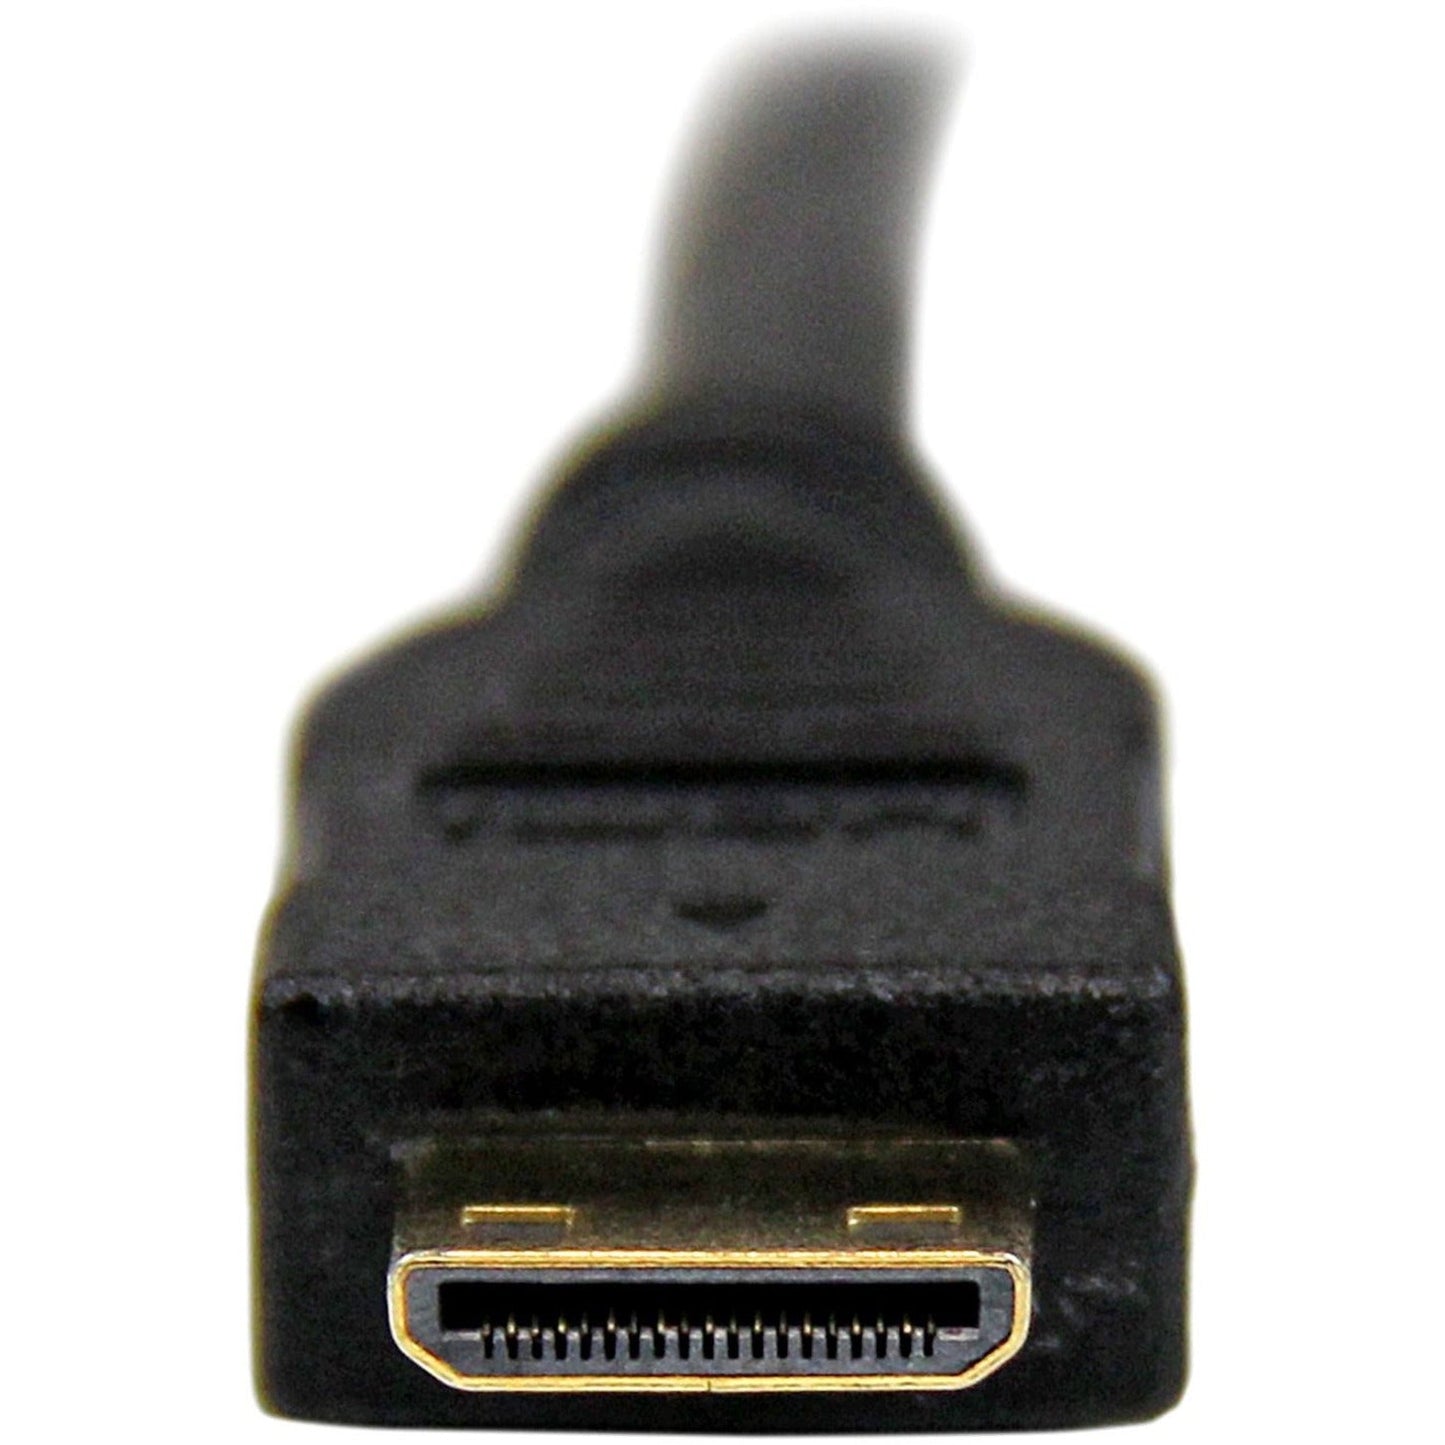 StarTech.com 2m (6.6 ft) Mini HDMI to DVI Cable DVI-D to HDMI Cable (1920x1200p) HDMI Mini Male to DVI-D Male Display Cable Adapter